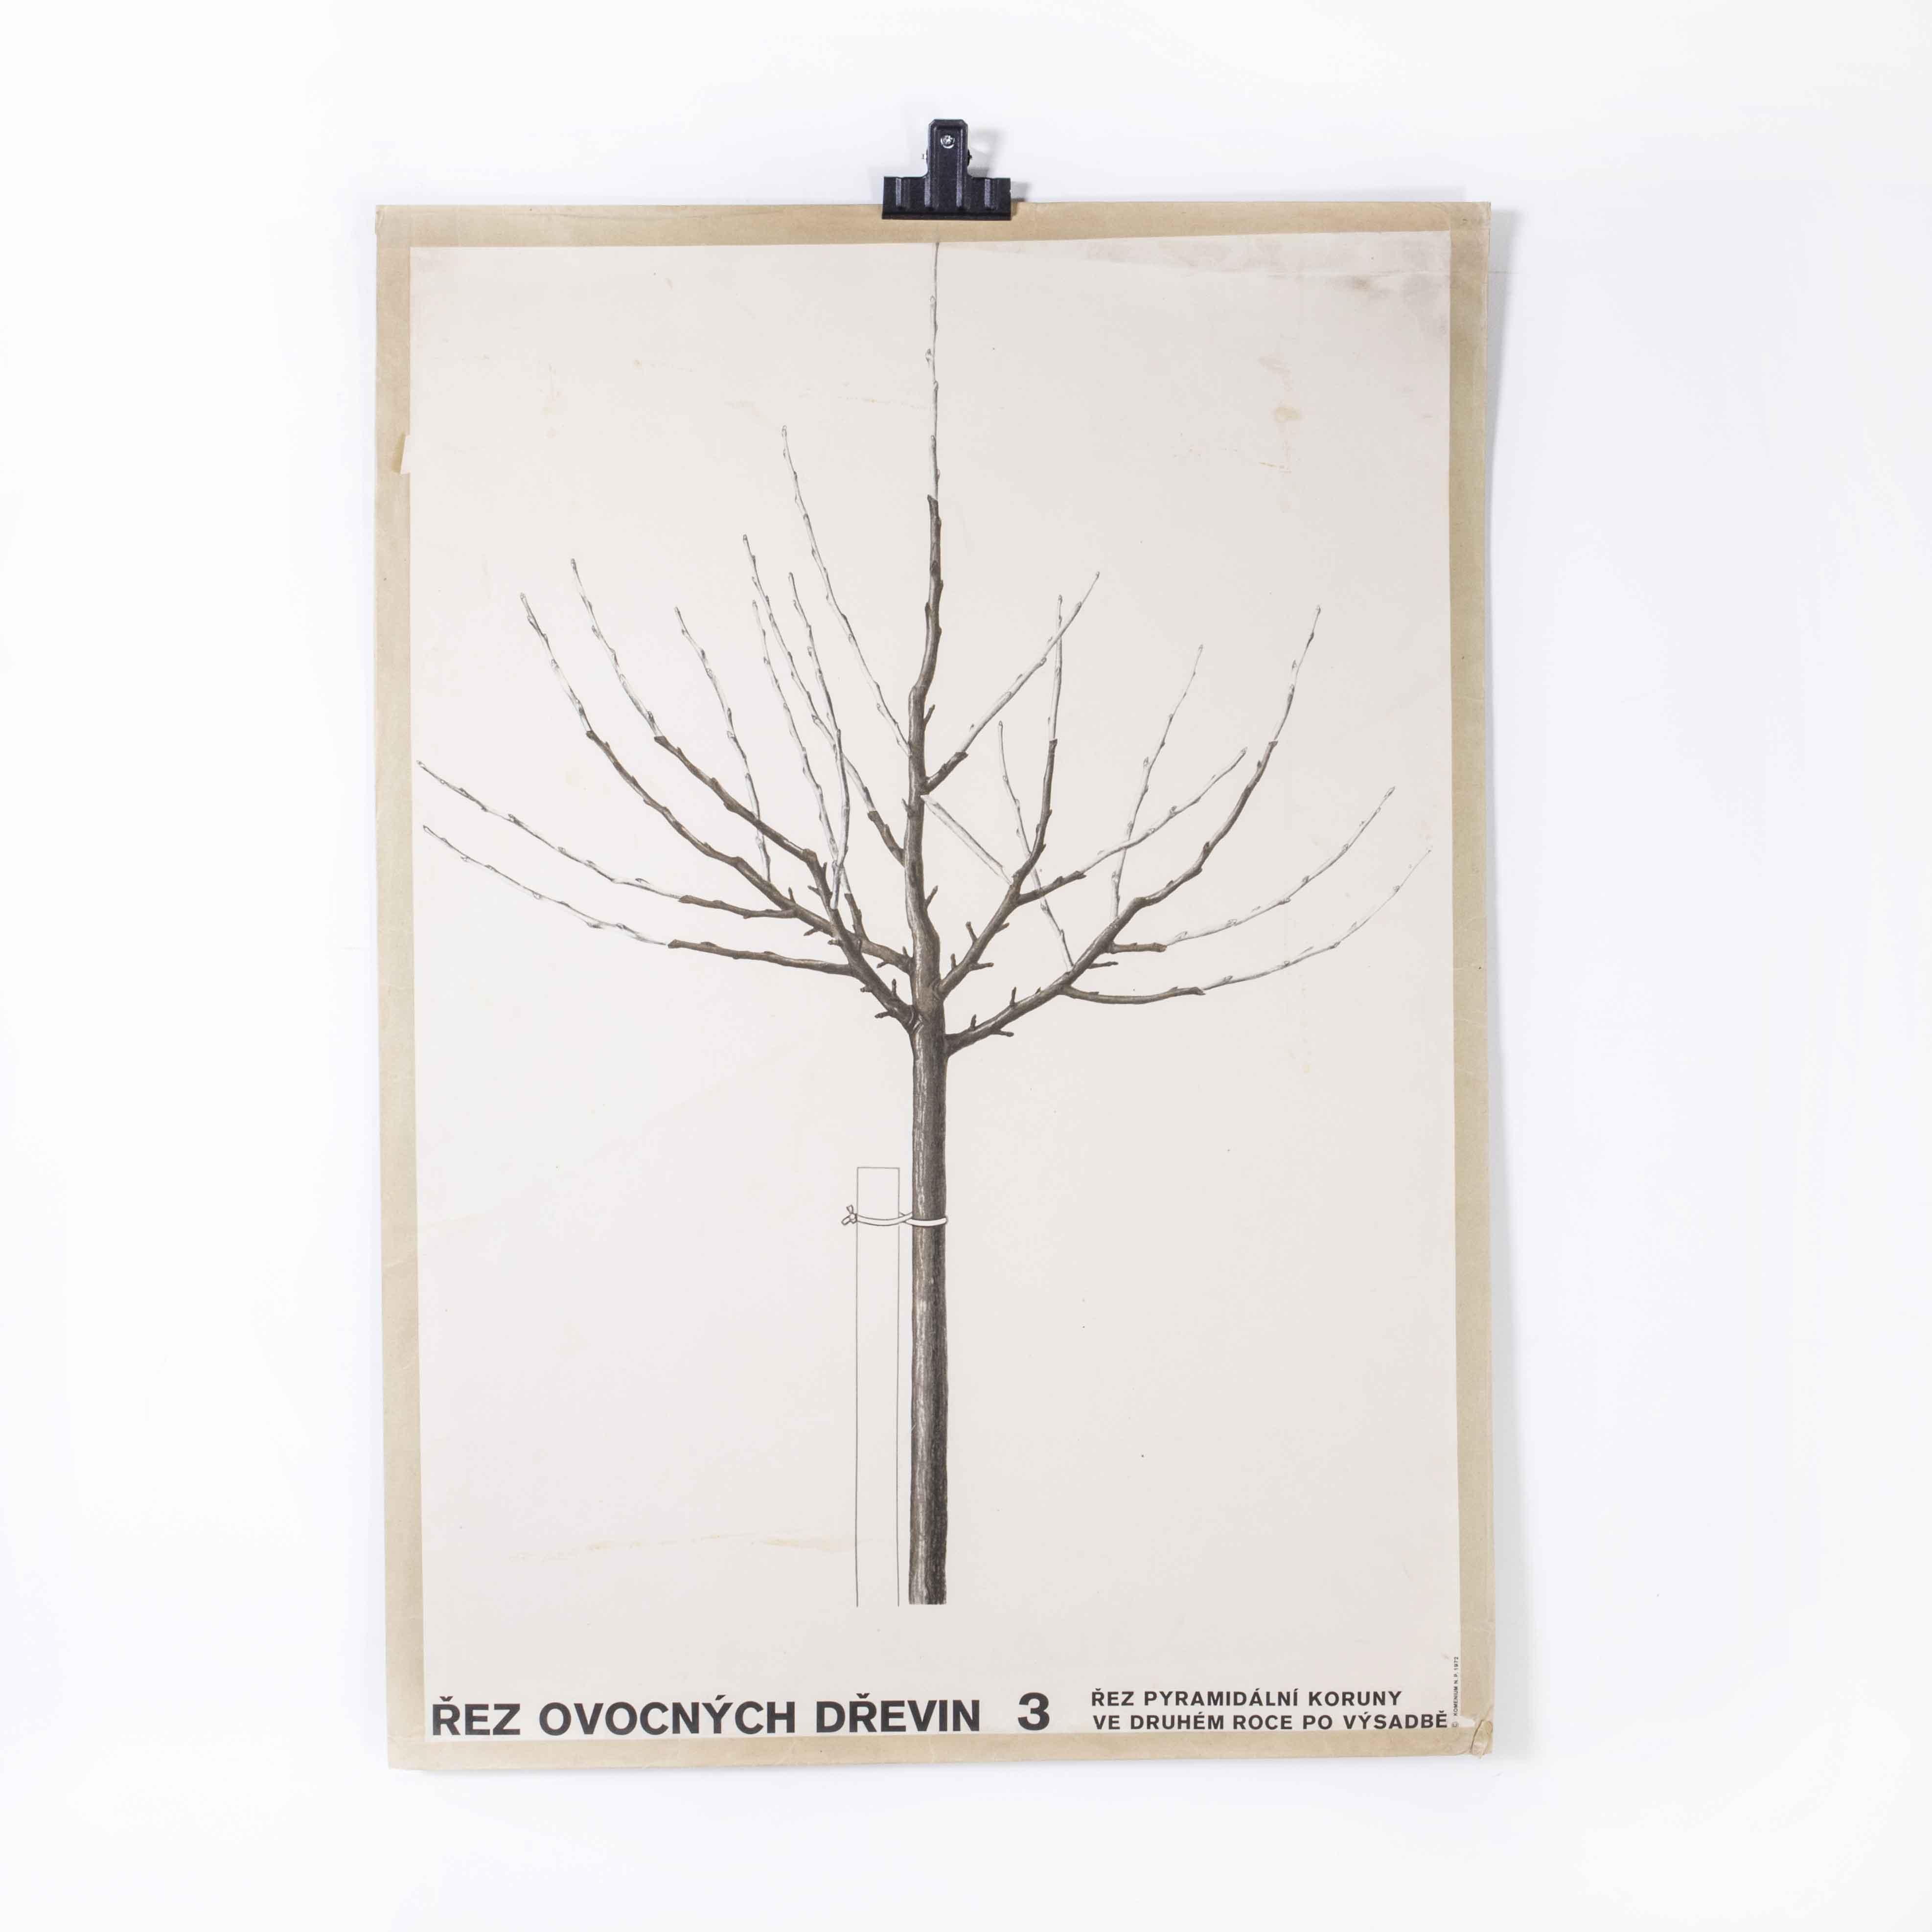 1970’s Singular bare tree educational poster
1970’s Singular bare tree educational poster. 20th Century Czechoslovakian educational chart. A rare and vintage wall chart from the Czech Republic illustrating a tree and its bare branches. This